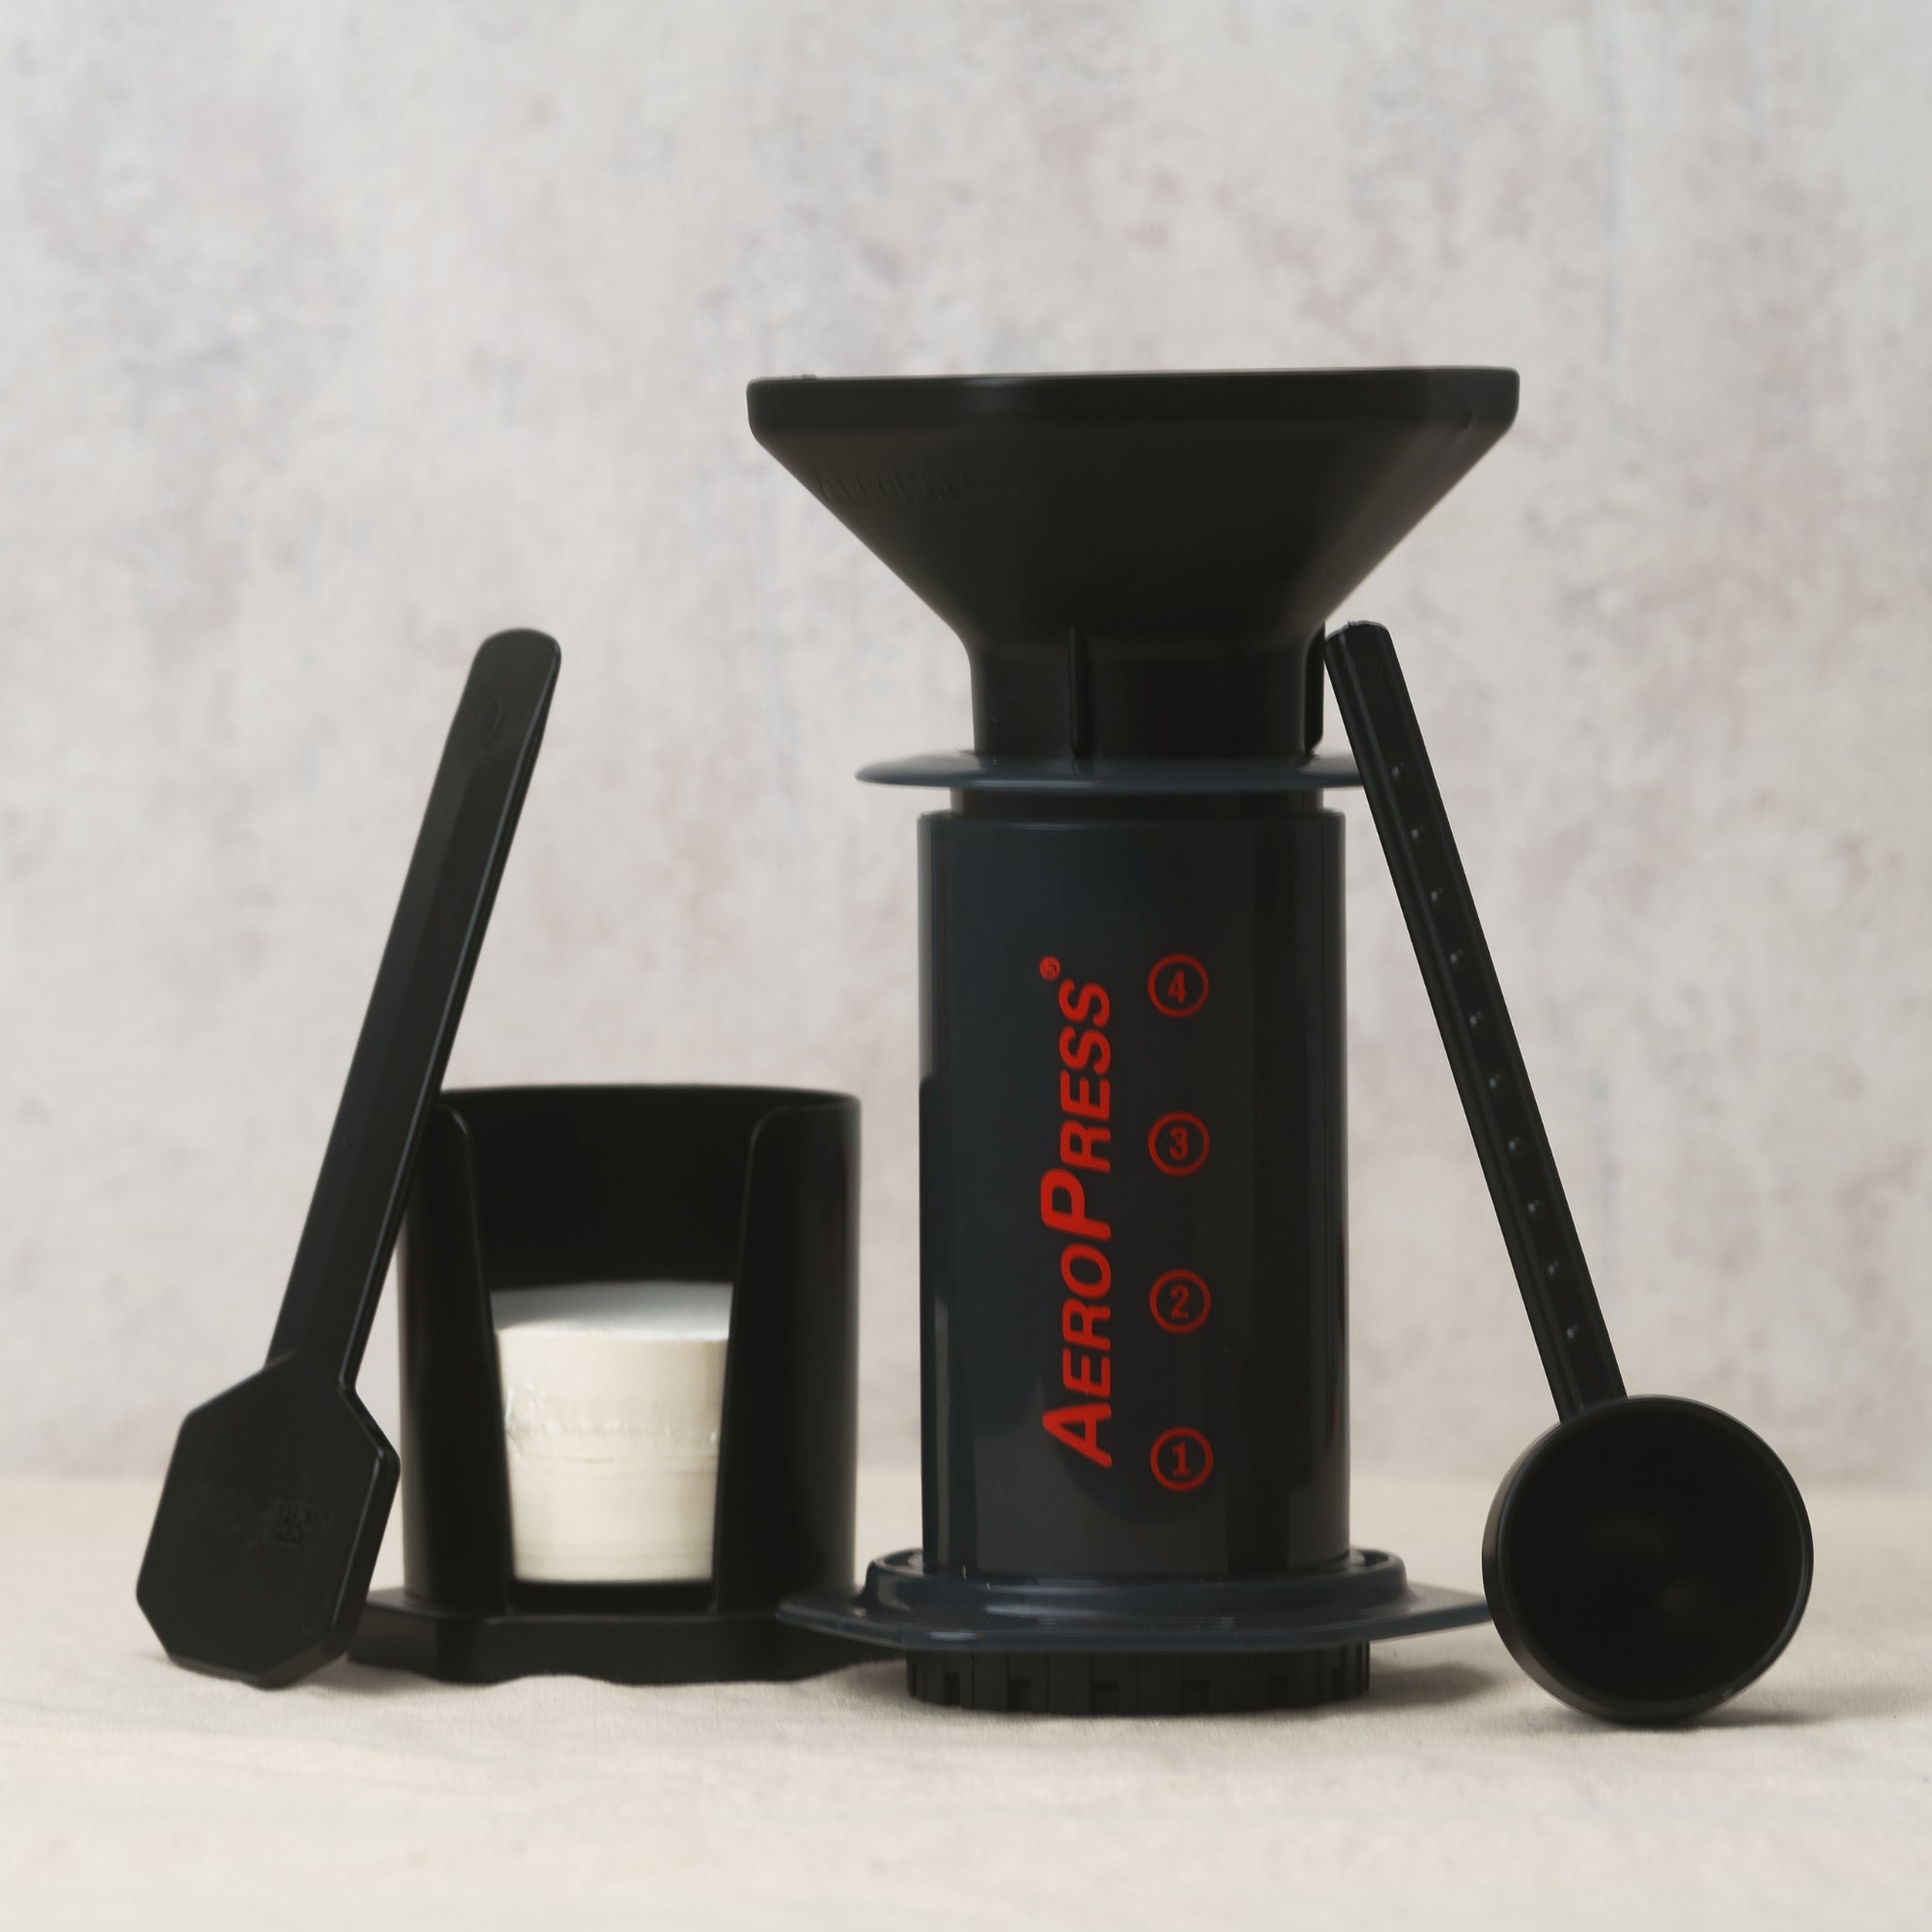 aeropress coffee maker picture of all pieces